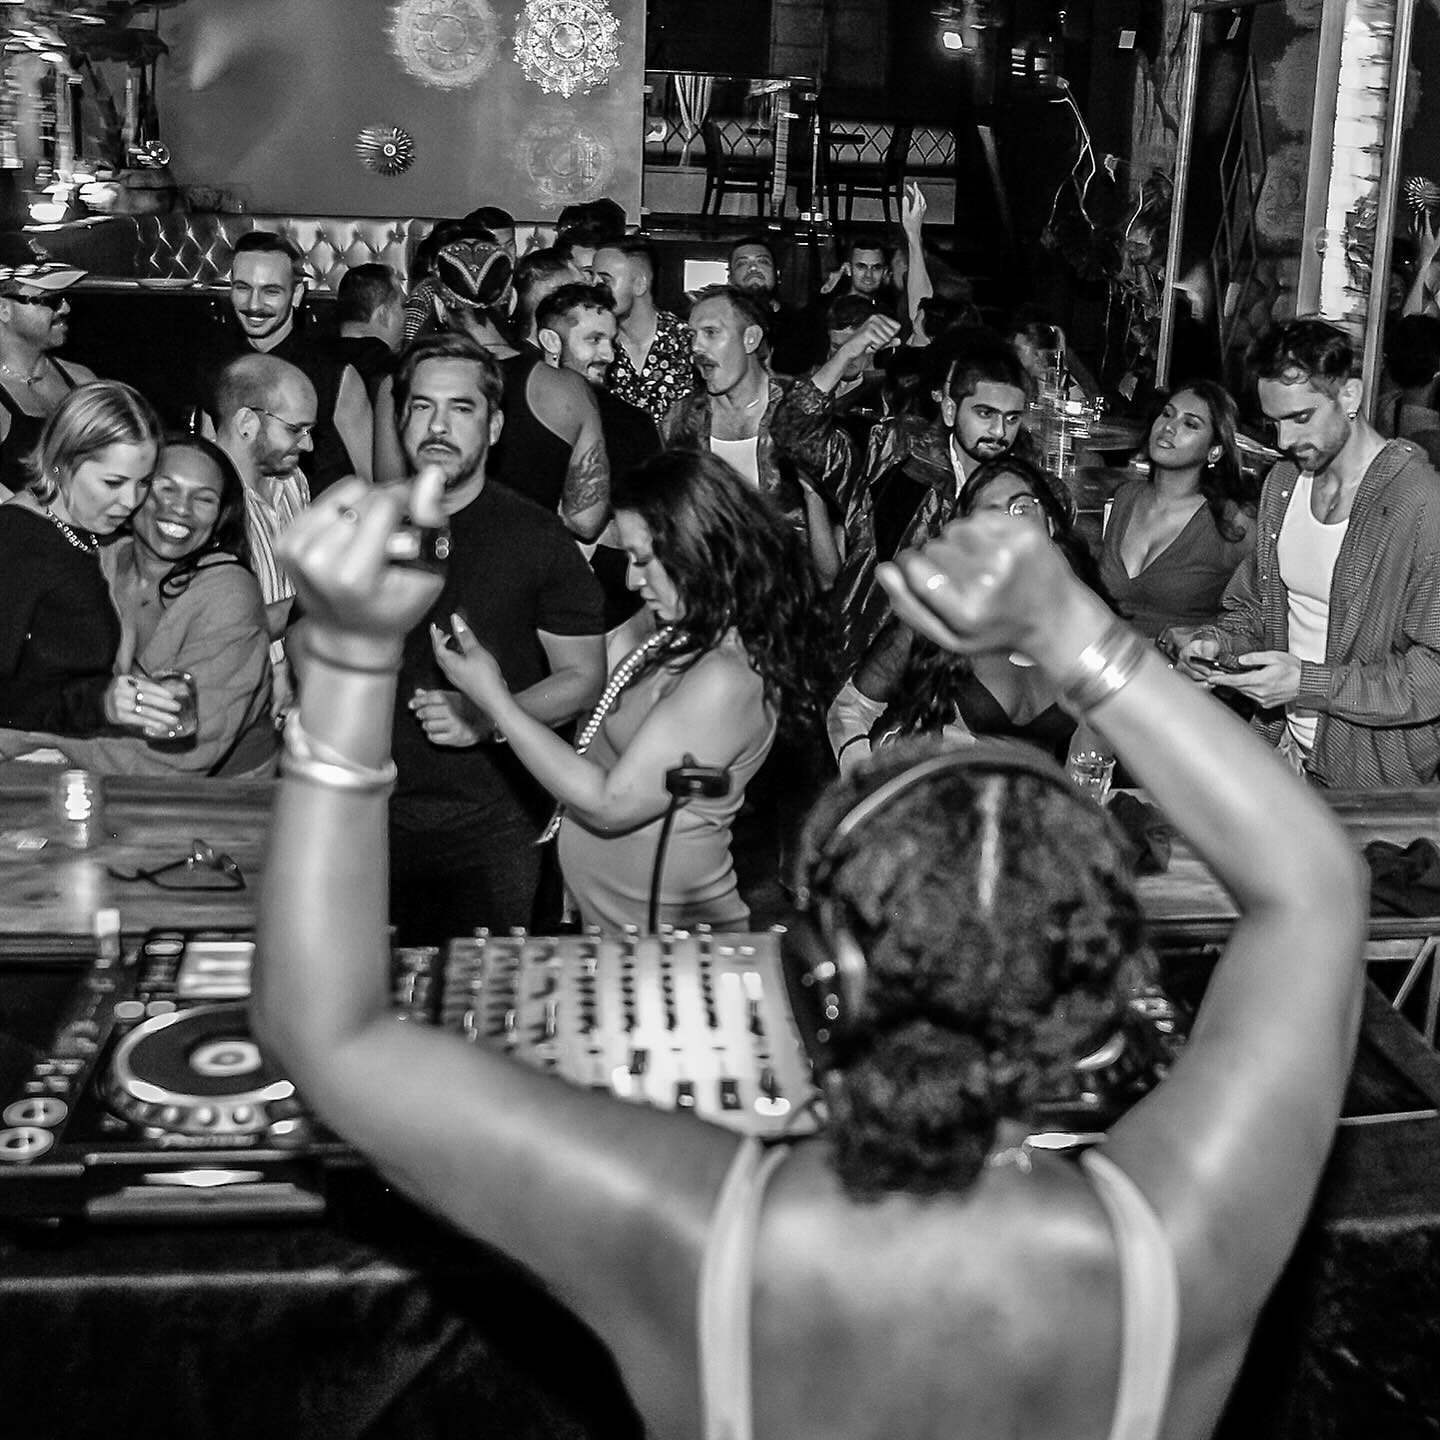 A whole vibe once the record spins. A magical @legendarychicago night captured by 📷 @jeff.ramone.photo 💯 🔗 in bio for DJ schedule. ✌️ #arbellachicago⁠